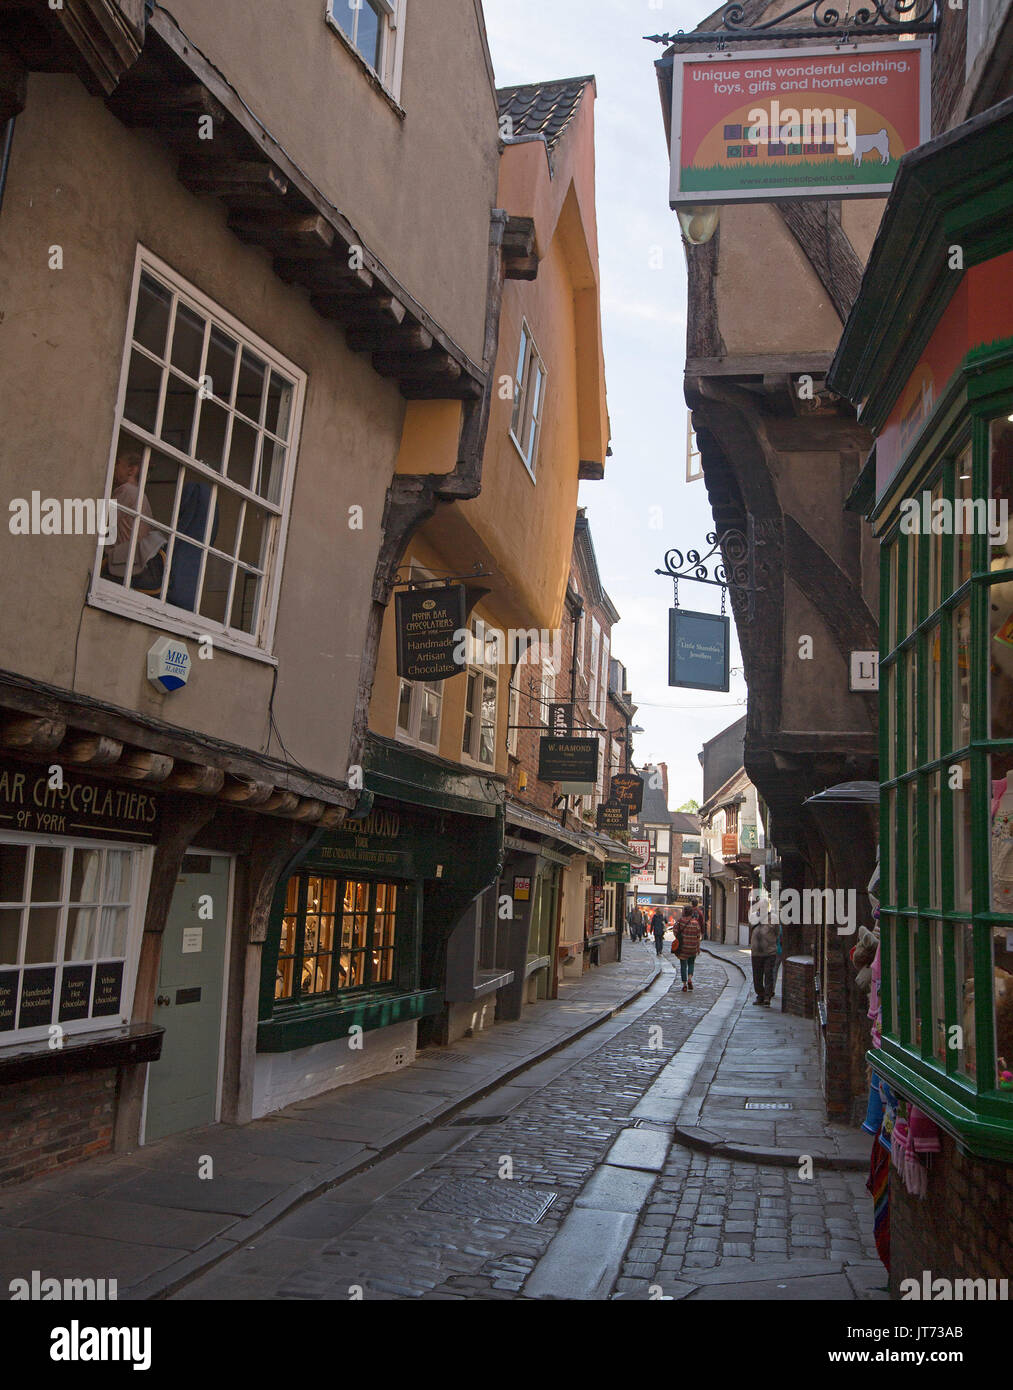 Historic shops lining ancient narrow cobbled street in The Shambles in city of York, England, with pedestrians wandering by. Stock Photo